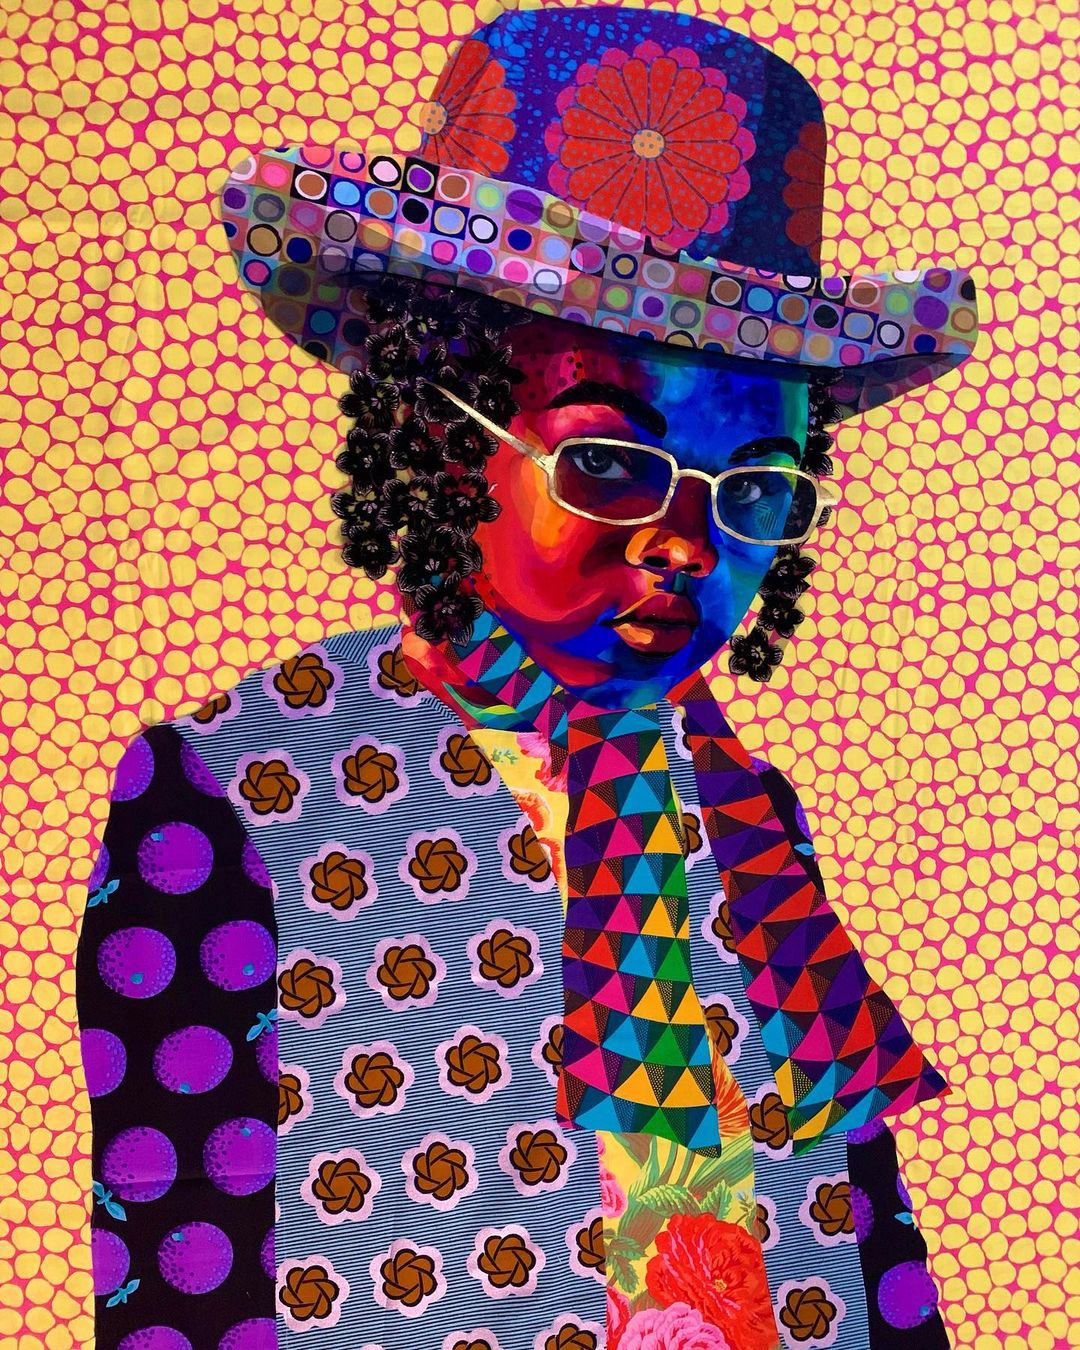 Vibrant Portraits Painted With Patterned Fabrics By Bisa Butler 20